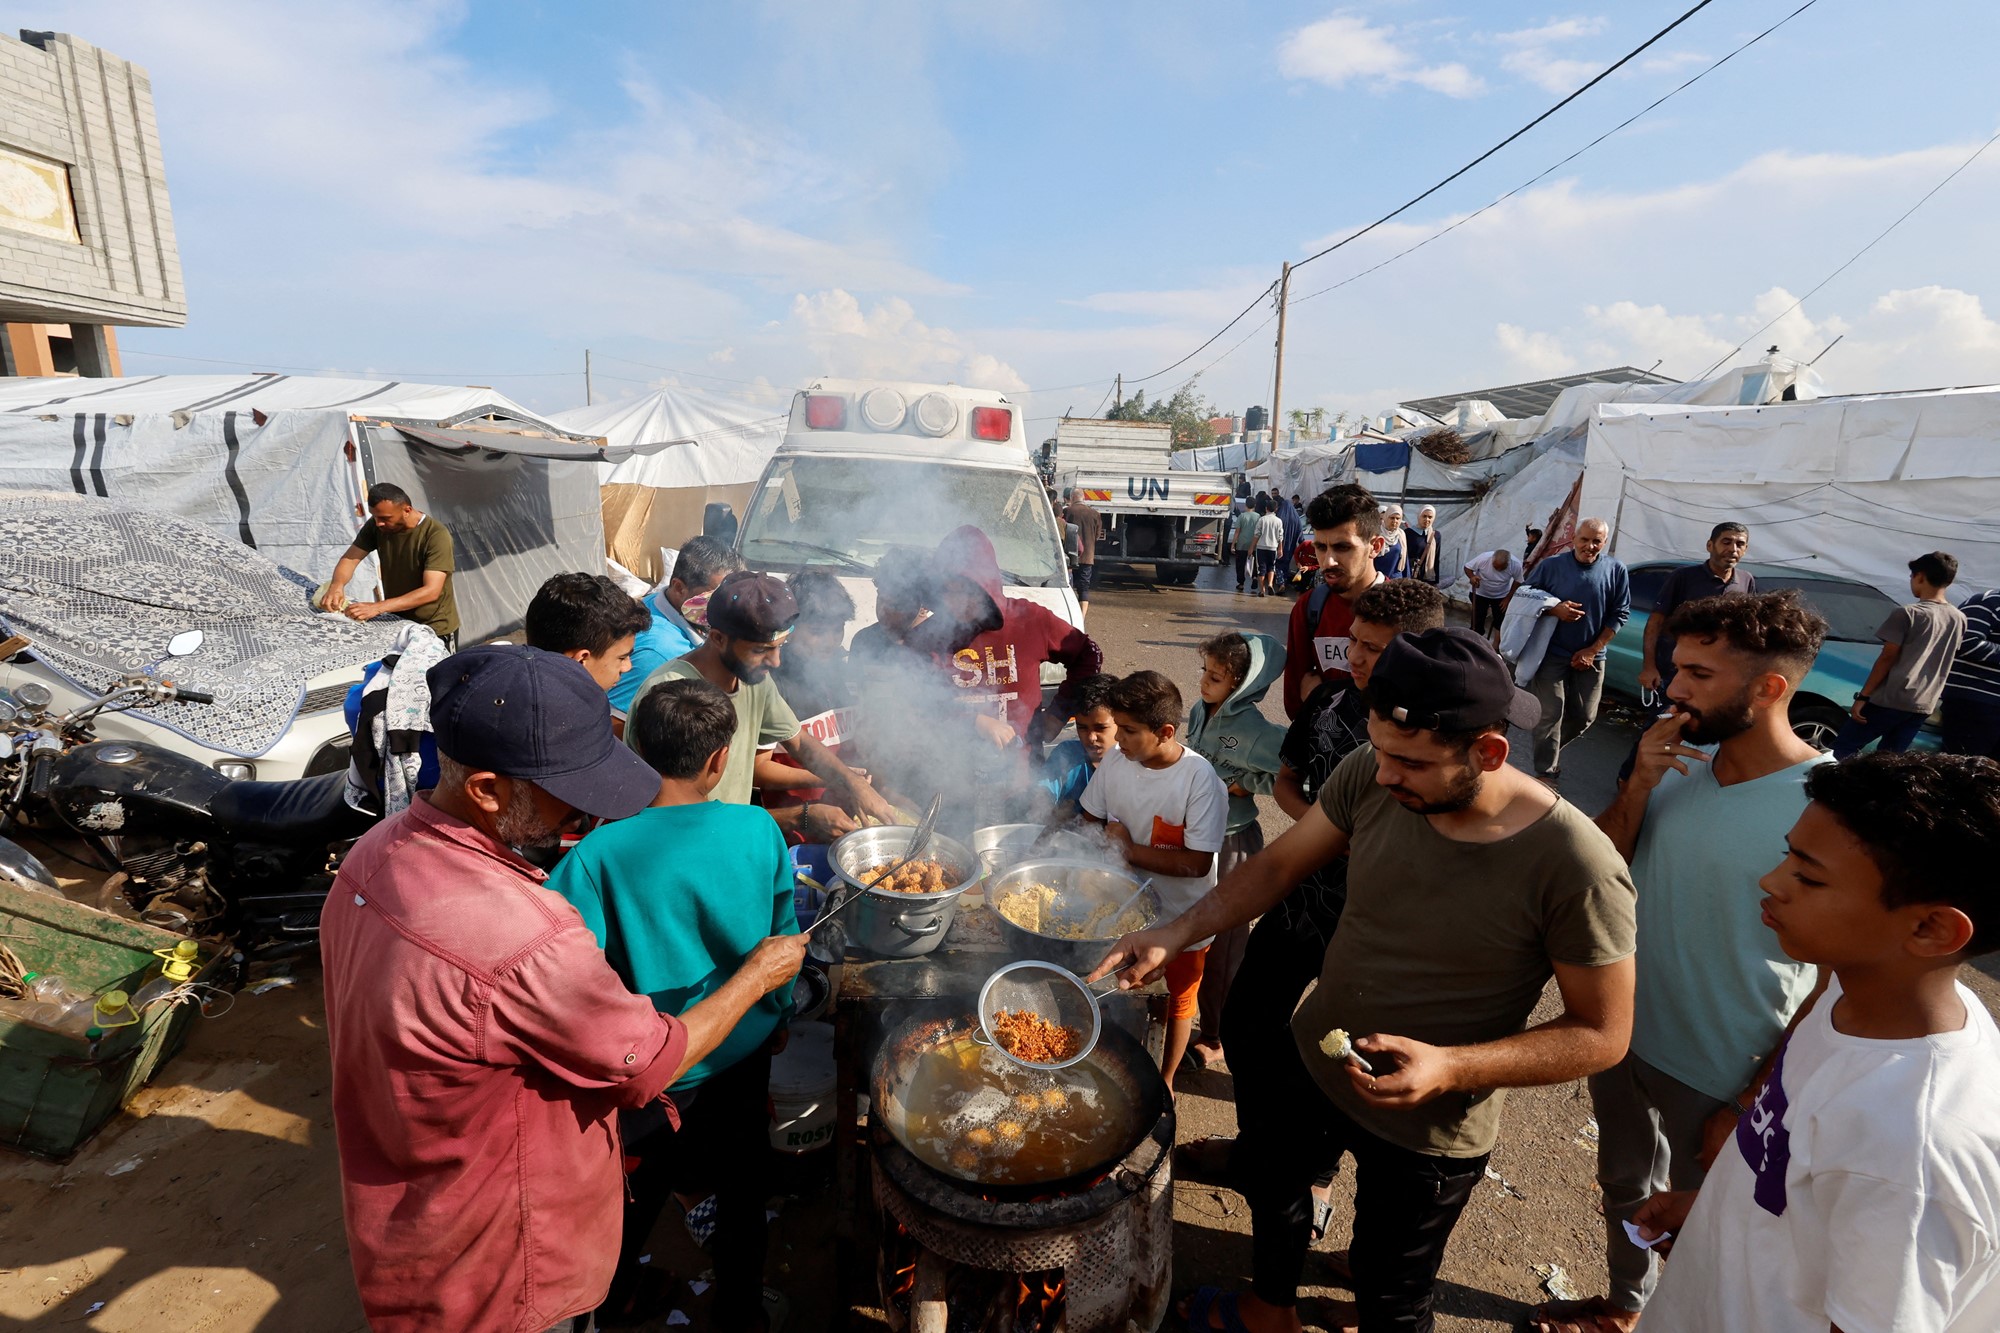 people cook together in an area full of tents